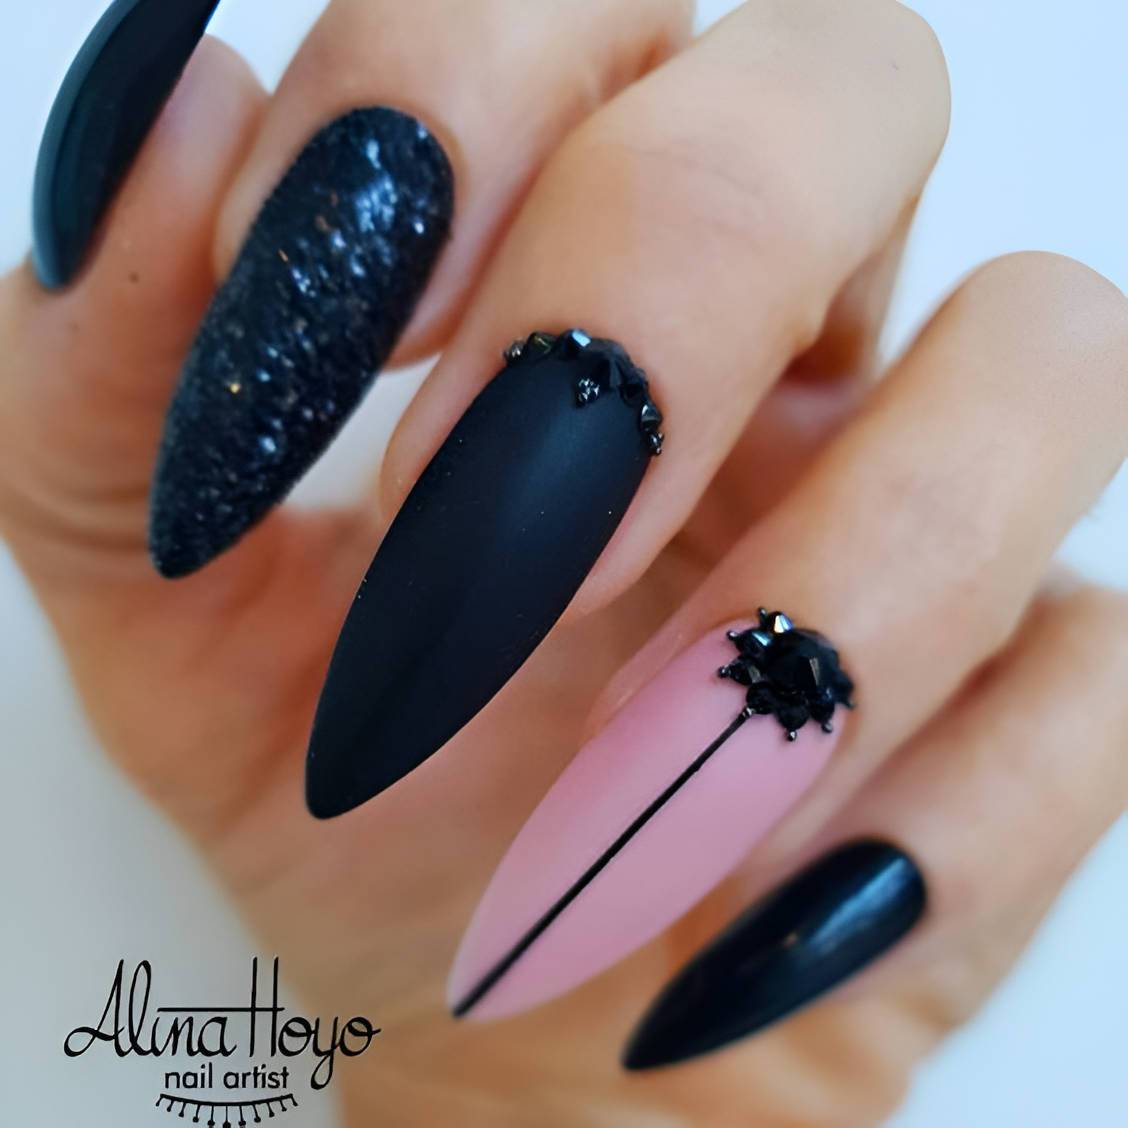 Stunning Stiletto Nail Designs Nobody Can Resist - 243